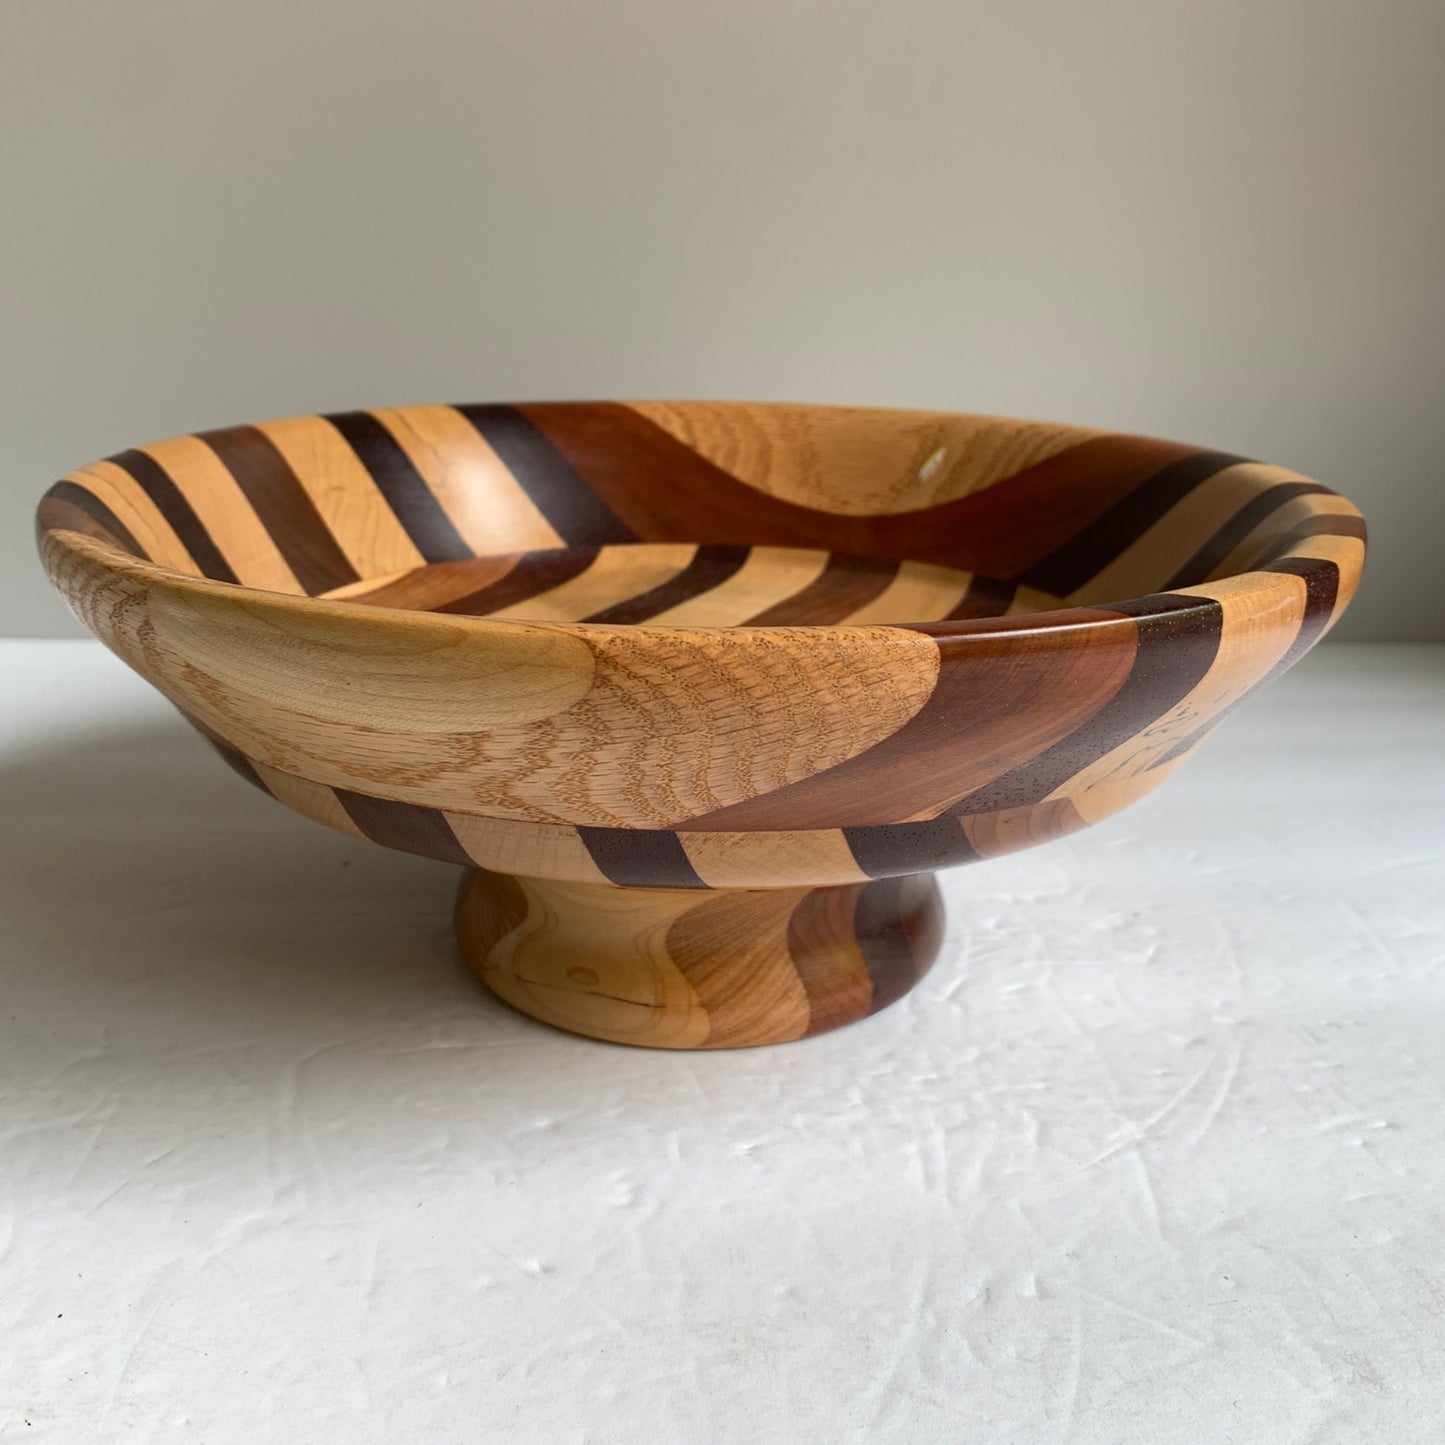 Jay Young Handcrafted Handmade Turned Wood Pedestal Bowl